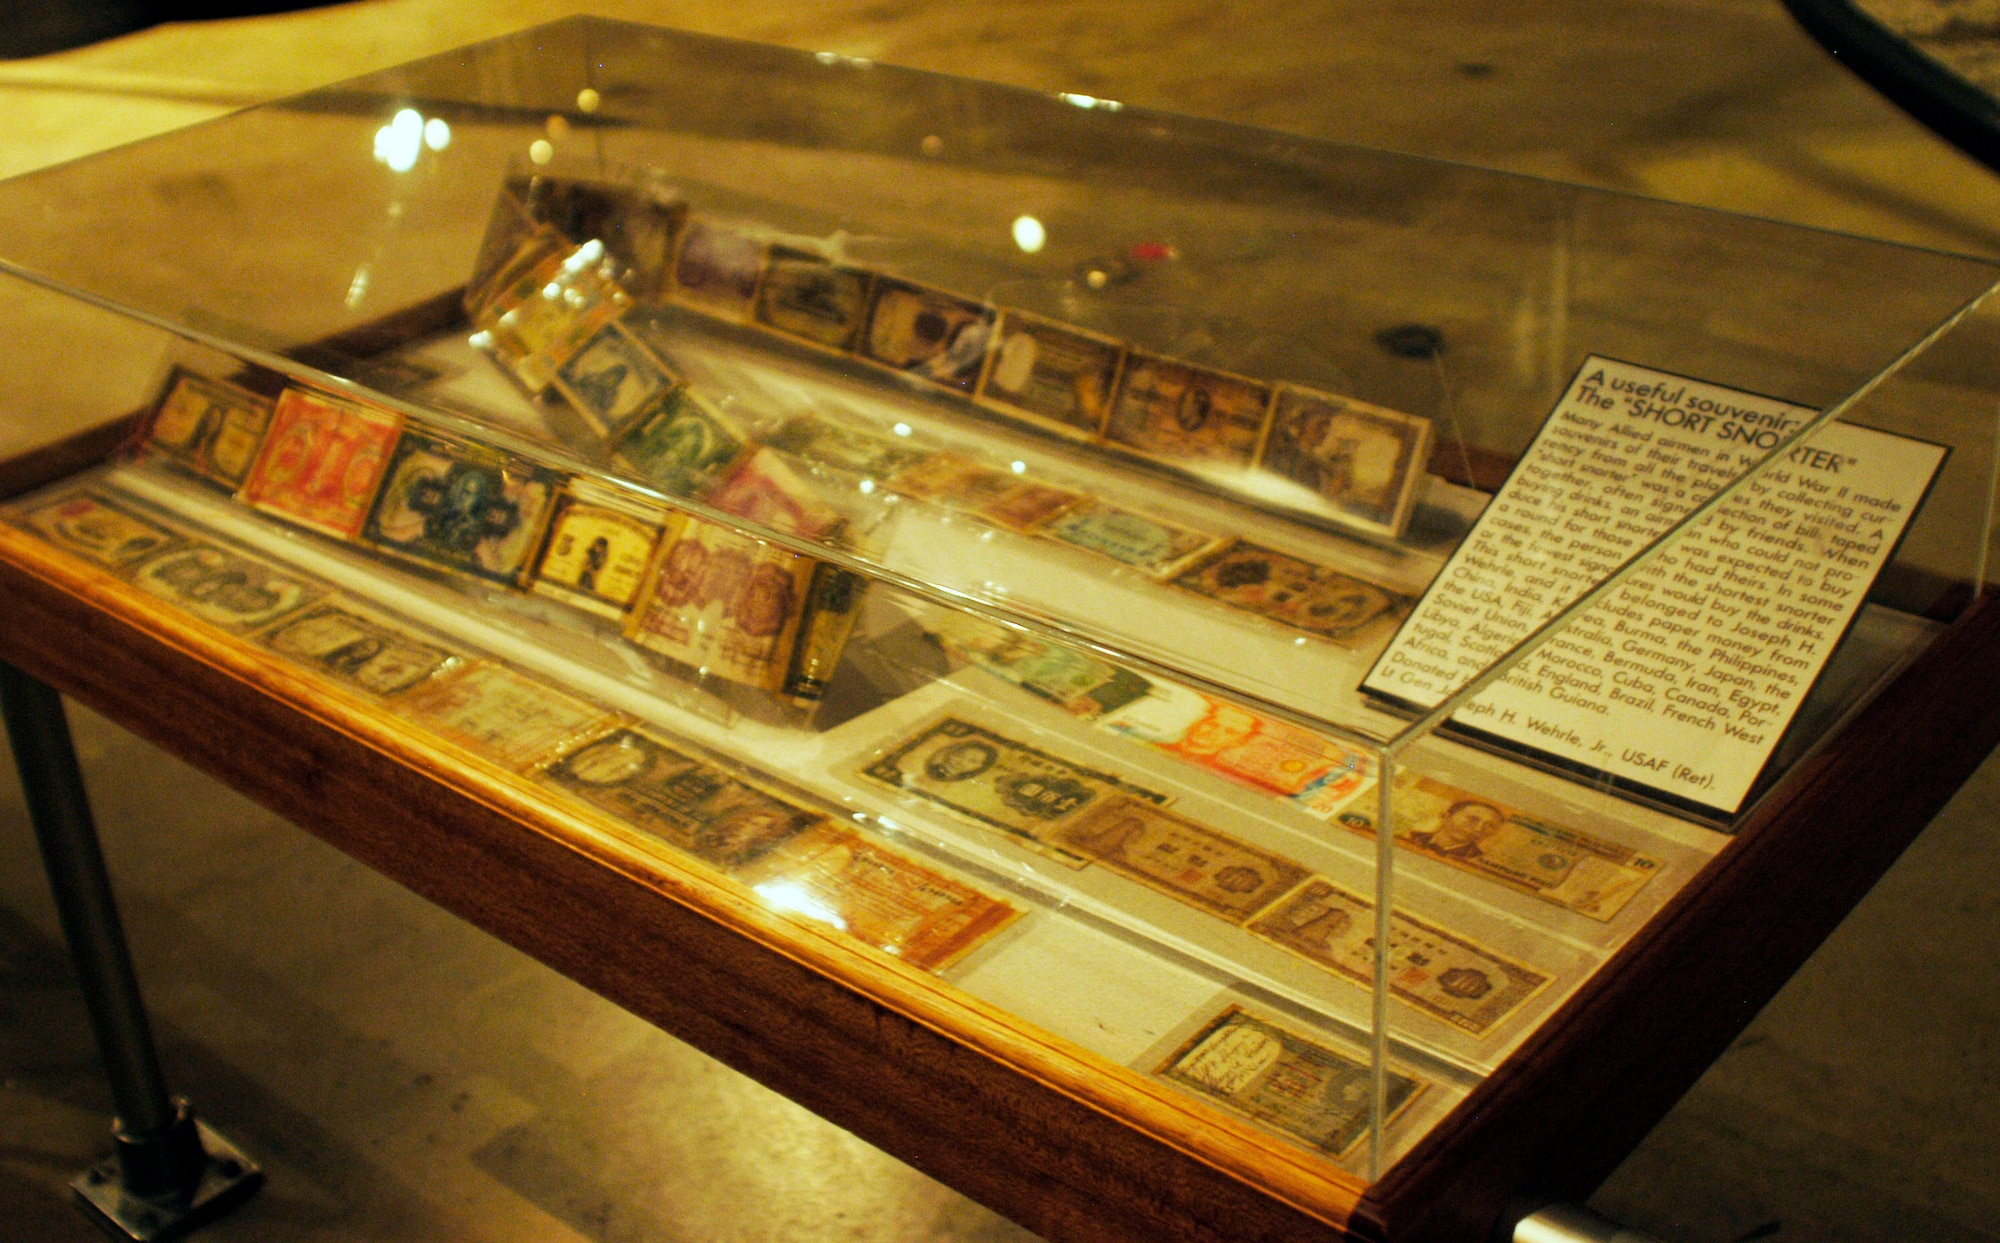 Many Allied airmen in World War II made souvenirs of their travels by collecting currency from all the places they visited. A "short snorter" was a collection of bills taped together, often signed by friends. This short snorter belonged to Joseph Wehrle, and it includes paper money from China, India, Korea, Burma, the Phillippines, the U.S., Fiji, Australia, Germany, Japan, the Soviet Union, France, Bermuda, Iran, Egypt, Libya, Algeria, Morocco, Cuba, Canada, Portugal, Scotland, England, Brazil, French West Africa and British Guiana. (U.S. Air Force photo)